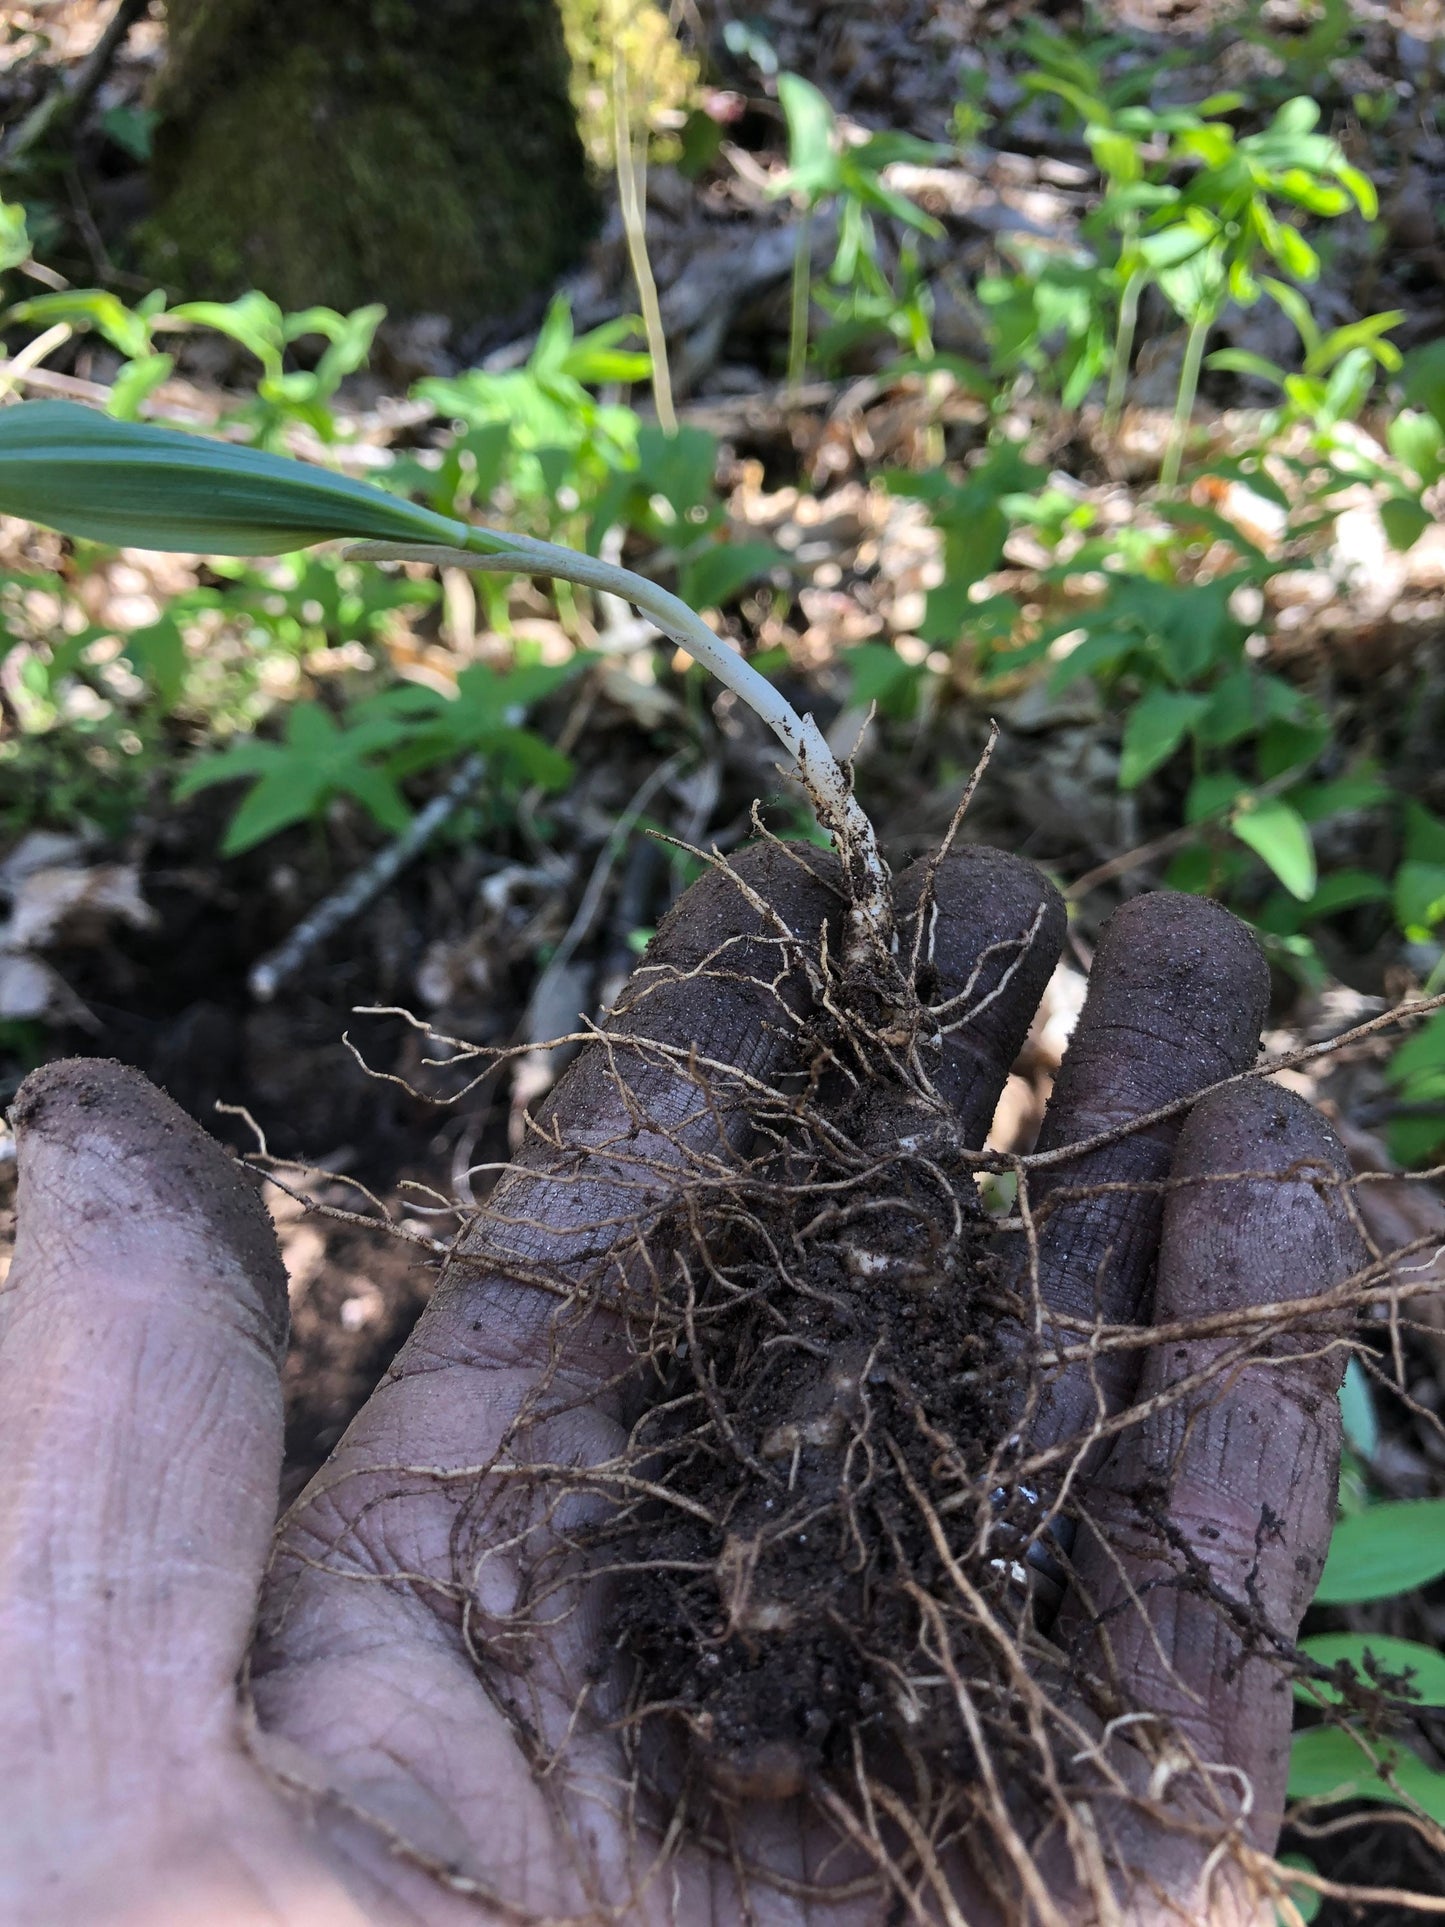 True Solomon’s seal rhizomes with Phytosanitary certification and Passport, grown by supplier